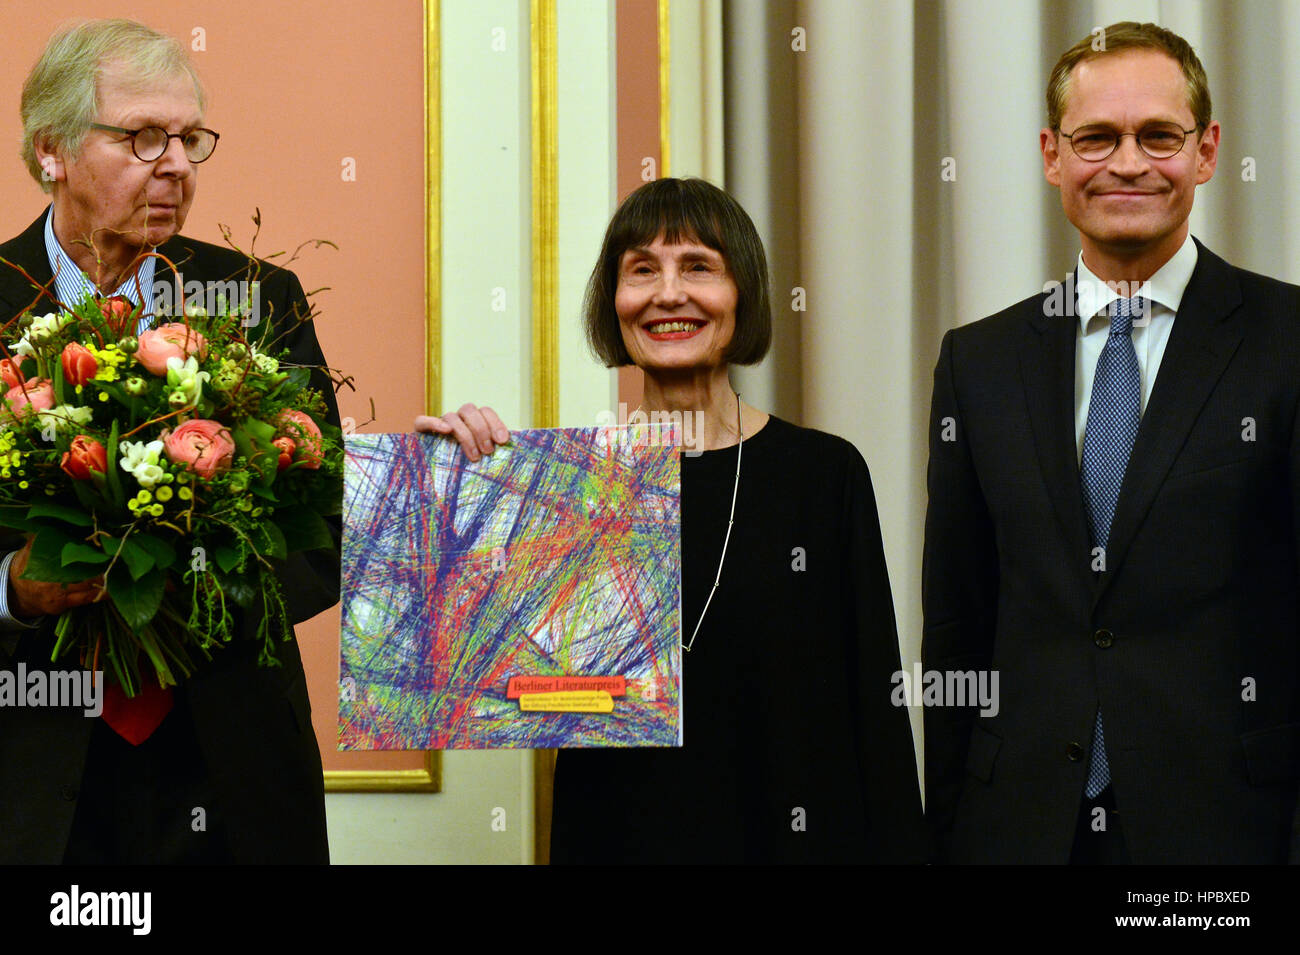 Berlin, Germany. 20th Feb, 2017. Author Ilma Rakusa (c), born in Slovakia and currently living in Zurich, receives the Berlin Literature Award 2017 ('Berliner literaturpreis') from Berlin's Mayor Michael Mueller (SPD, r) and Walter Rasch, chairman of the foundation 'Preussische Seehandlung' in Berlin, Germany, 20 February 2017. Photo: Maurizio Gambarini/dpa/Alamy Live News Stock Photo